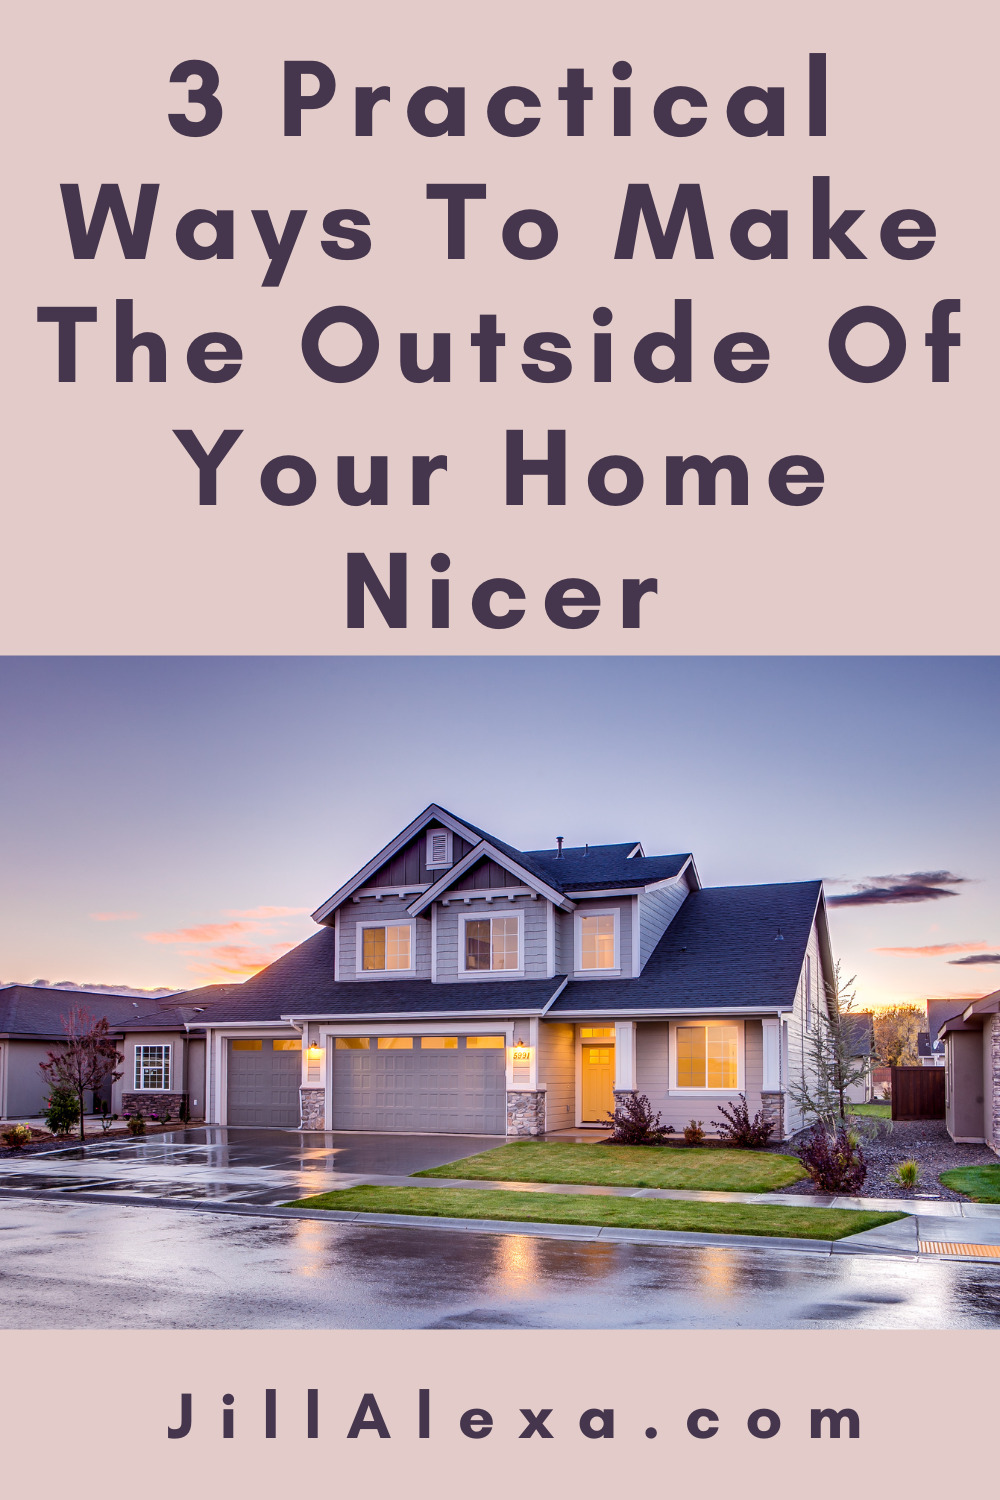 Everyone wants their homes to look nice, and it’s easy to see why. Here are 3 practical ways you can make the outside of your home nicer.